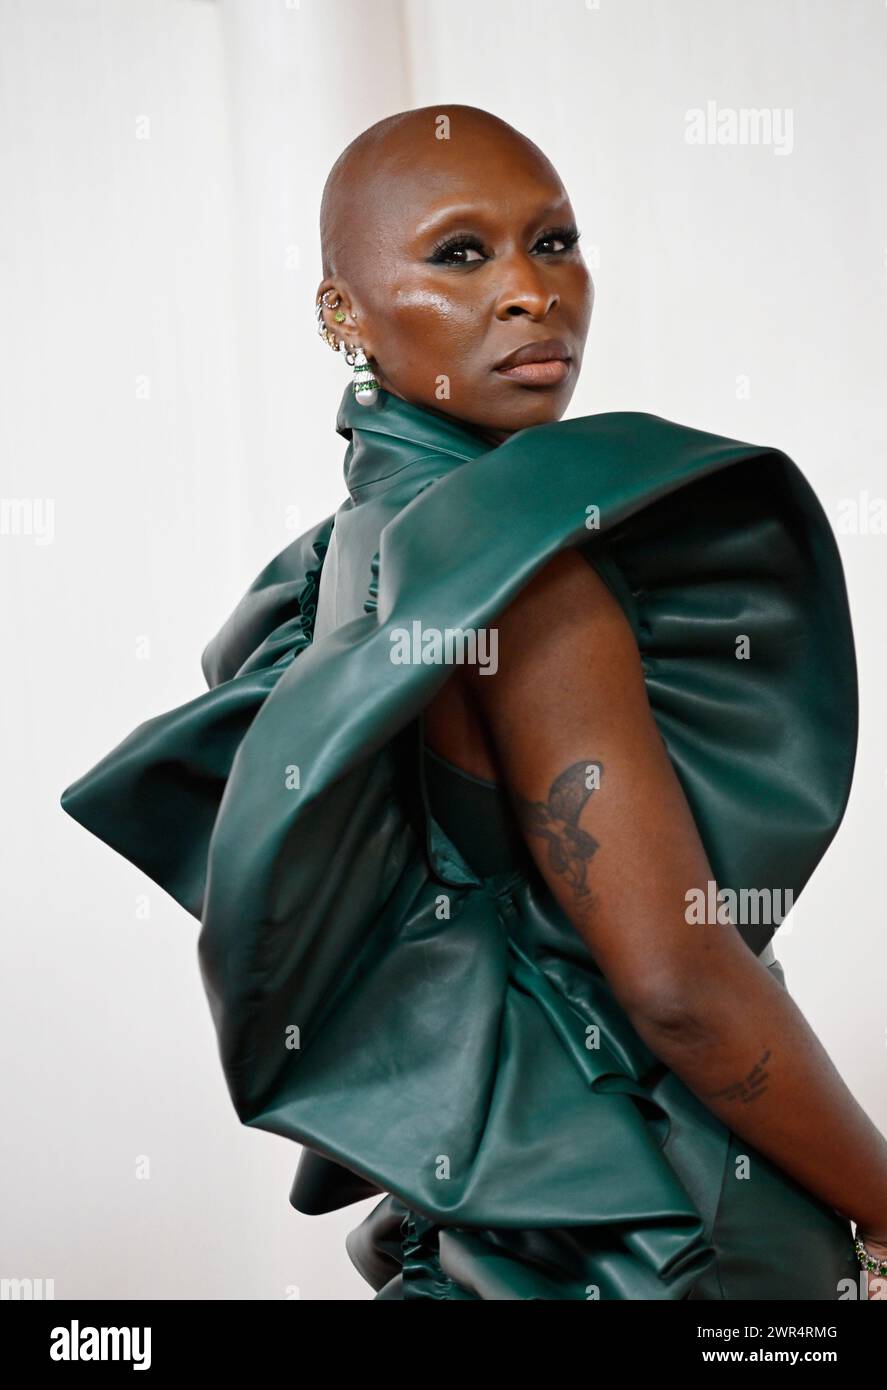 Los Angeles, Ca. 10th Mar, 2024. Cynthia Erivo at the 96th Annual Oscars at at the Ovation Hollywood on March 10, 2024 in Los Angeles, California. Credit: Valerie Goodloe/Media Punch/Alamy Live News Stock Photo